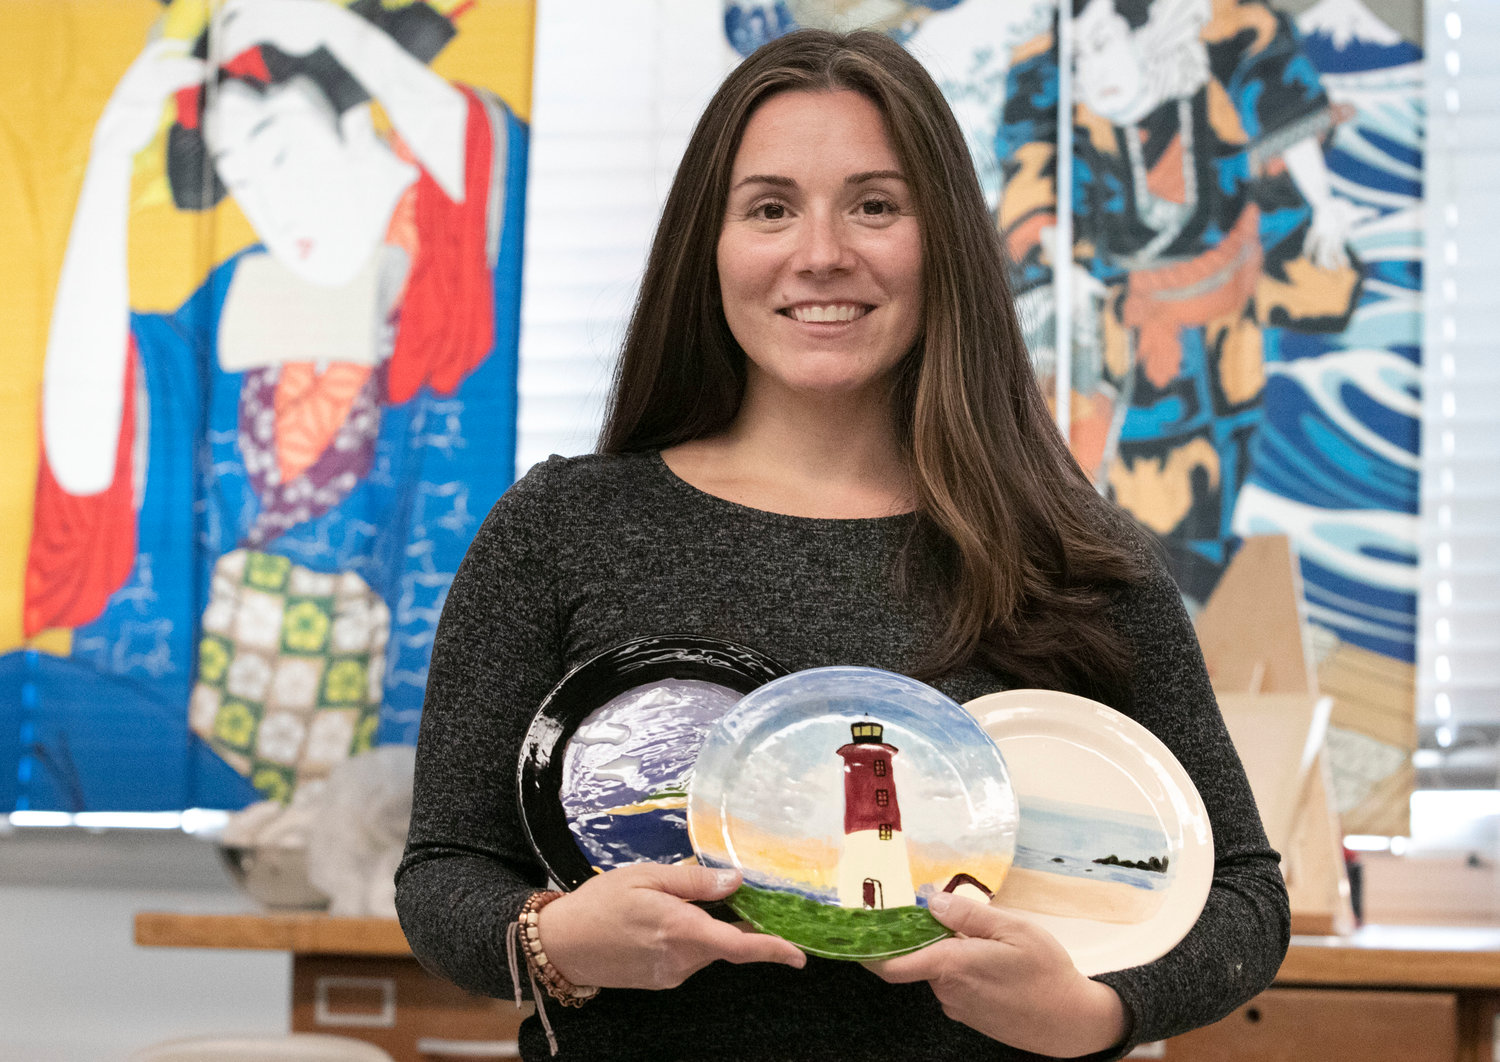 Ceramics and art teacher Eileen Locicero holds up works made by her students.